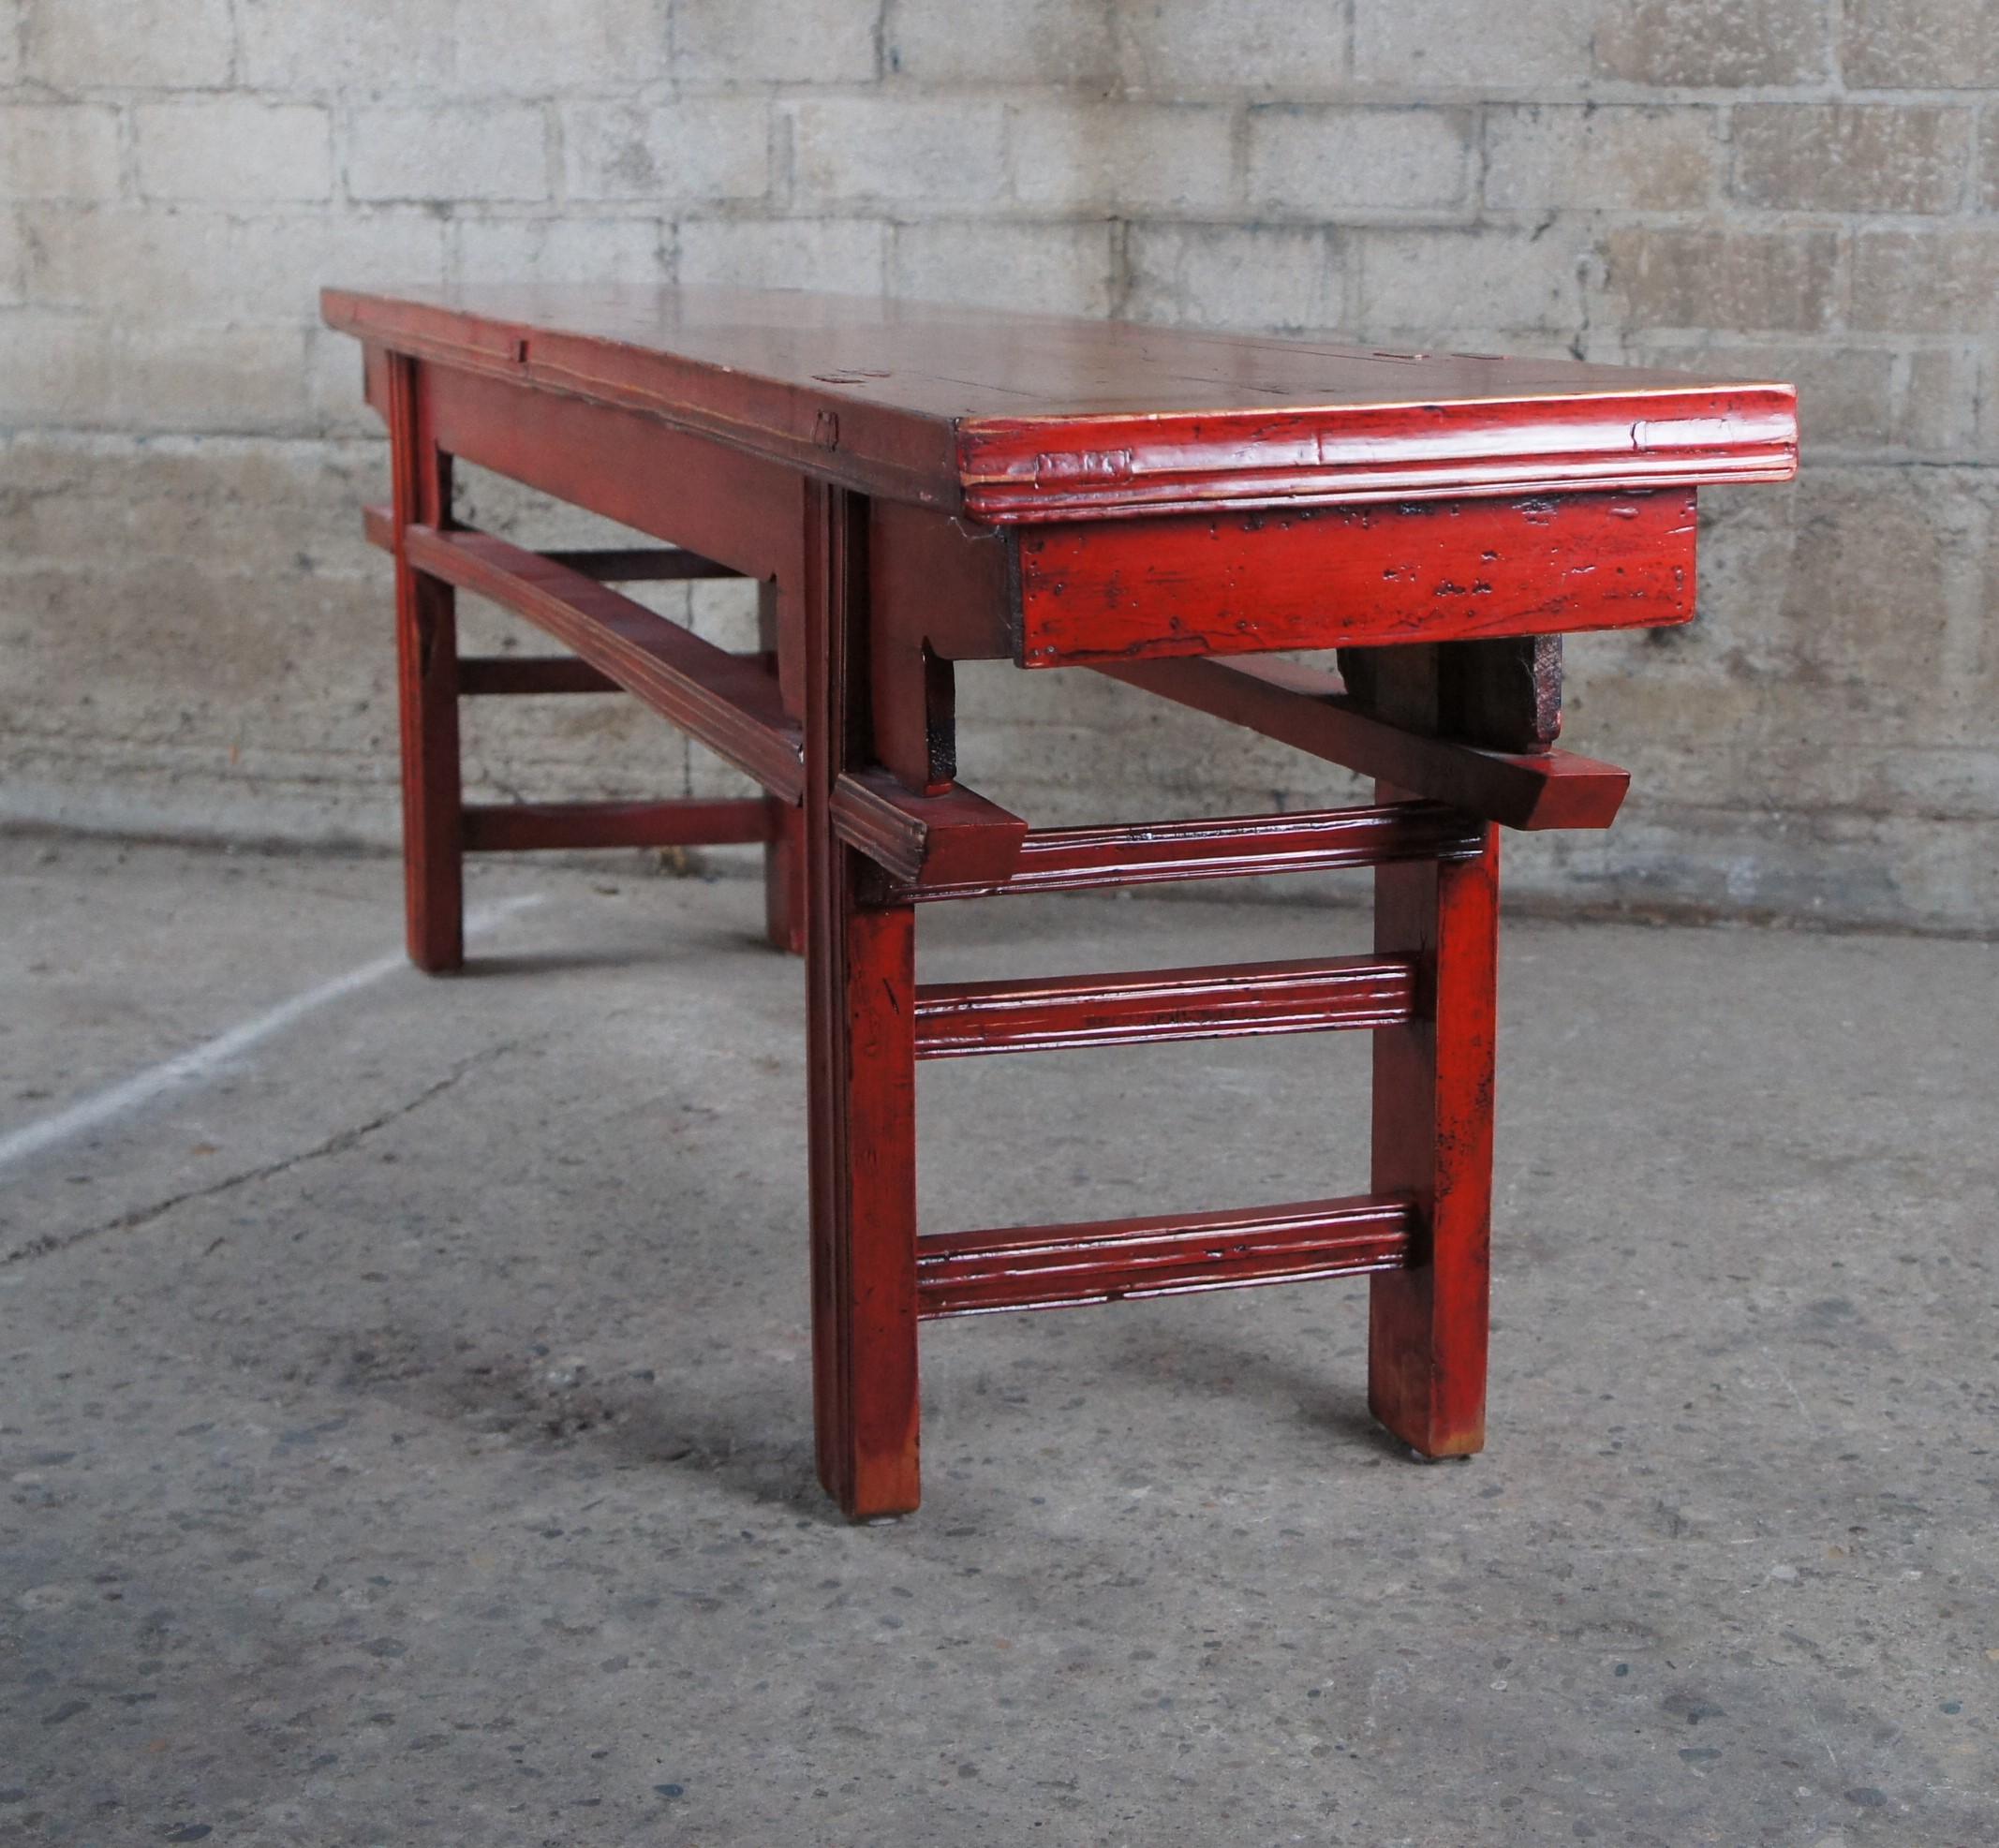 20th Century Chinese Elm Red Lacquer Chinoiserie Altar Hallway Bench Seat Pew For Sale 5